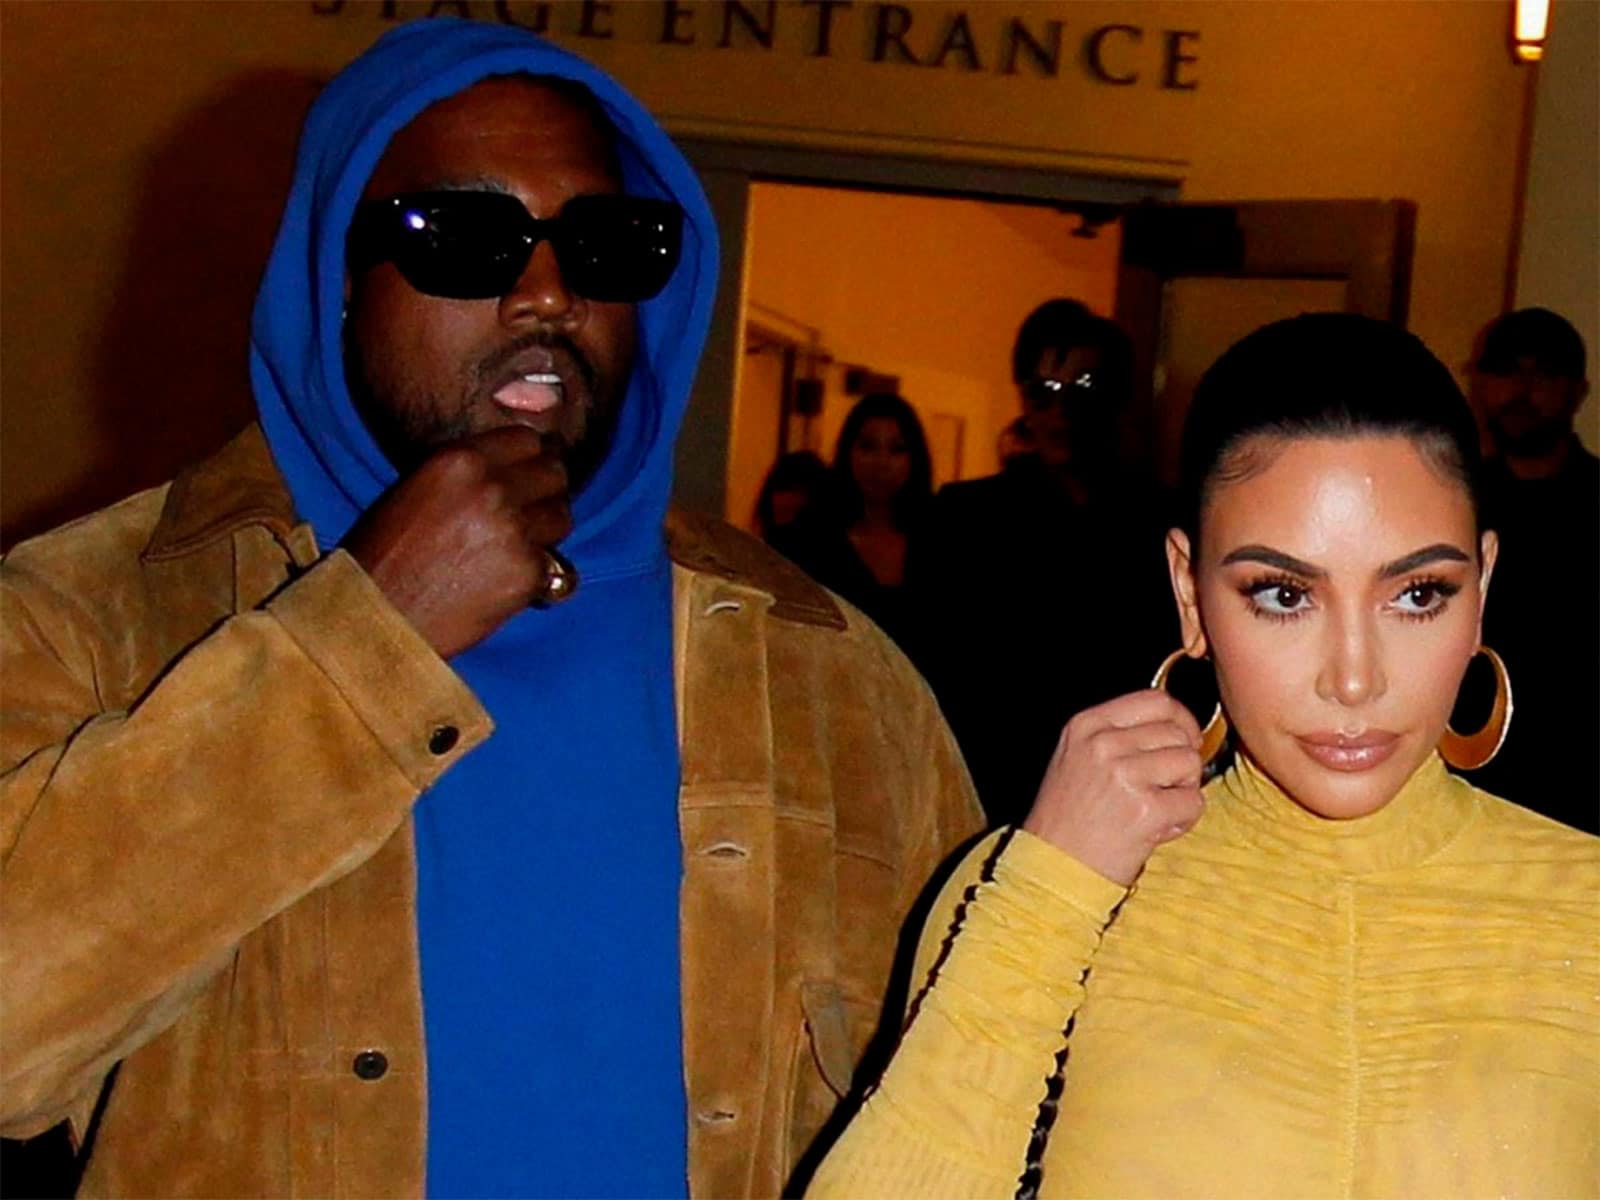 Kim Kardashian and Kanye West’s divorce is now official